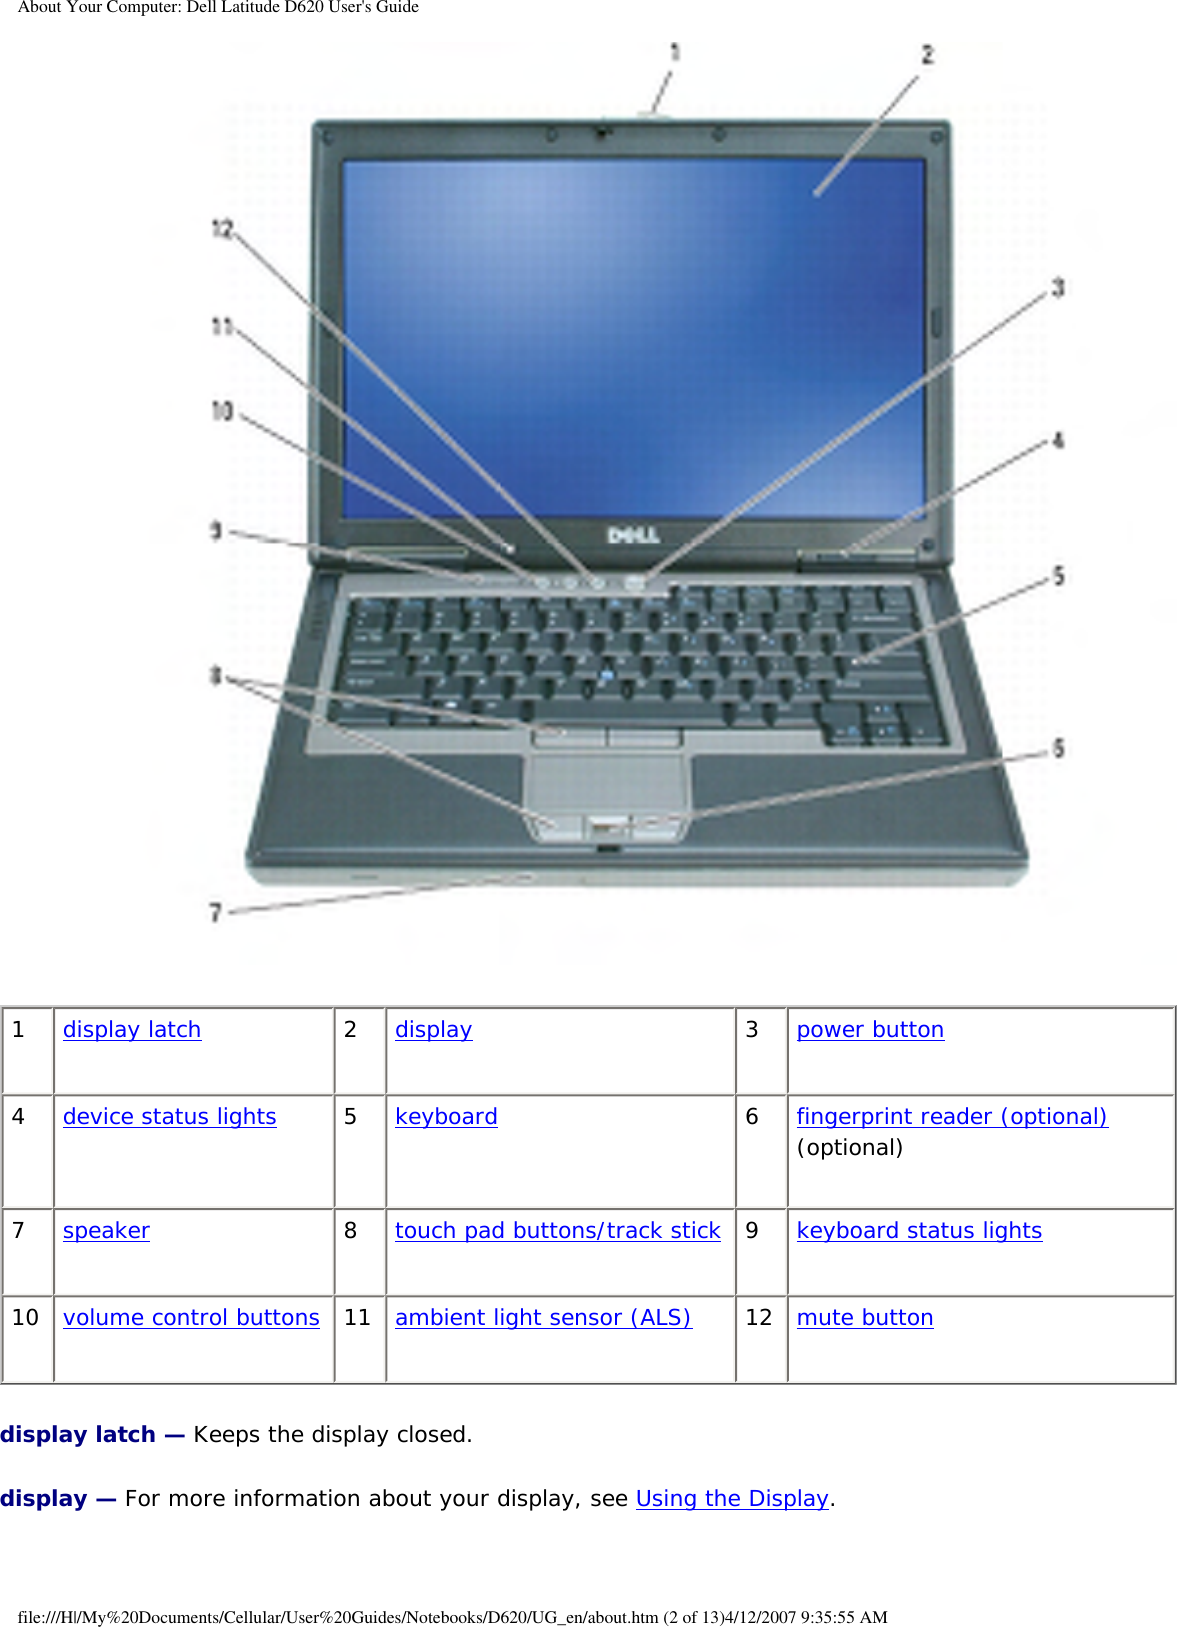 About Your Computer: Dell Latitude D620 User&apos;s Guide 1display latch 2display 3power button4device status lights 5keyboard 6fingerprint reader (optional) (optional)7speaker 8touch pad buttons/track stick 9keyboard status lights10 volume control buttons 11 ambient light sensor (ALS) 12  mute buttondisplay latch — Keeps the display closed.display — For more information about your display, see Using the Display.file:///H|/My%20Documents/Cellular/User%20Guides/Notebooks/D620/UG_en/about.htm (2 of 13)4/12/2007 9:35:55 AM